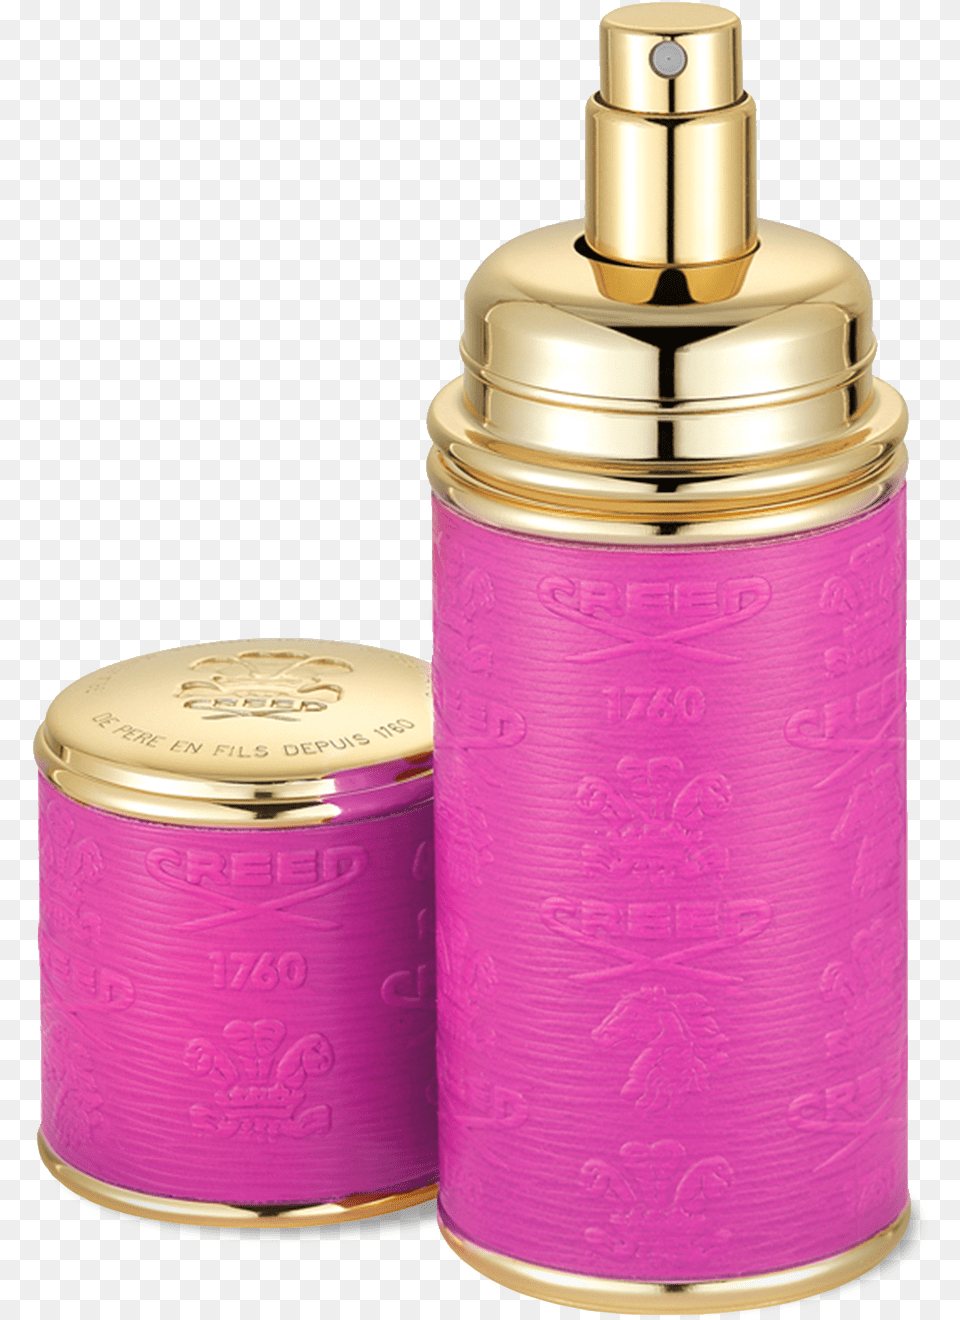 Gold Trim Download Creed Aventus Refill Bottle, Cosmetics, Perfume, Can, Tin Png Image